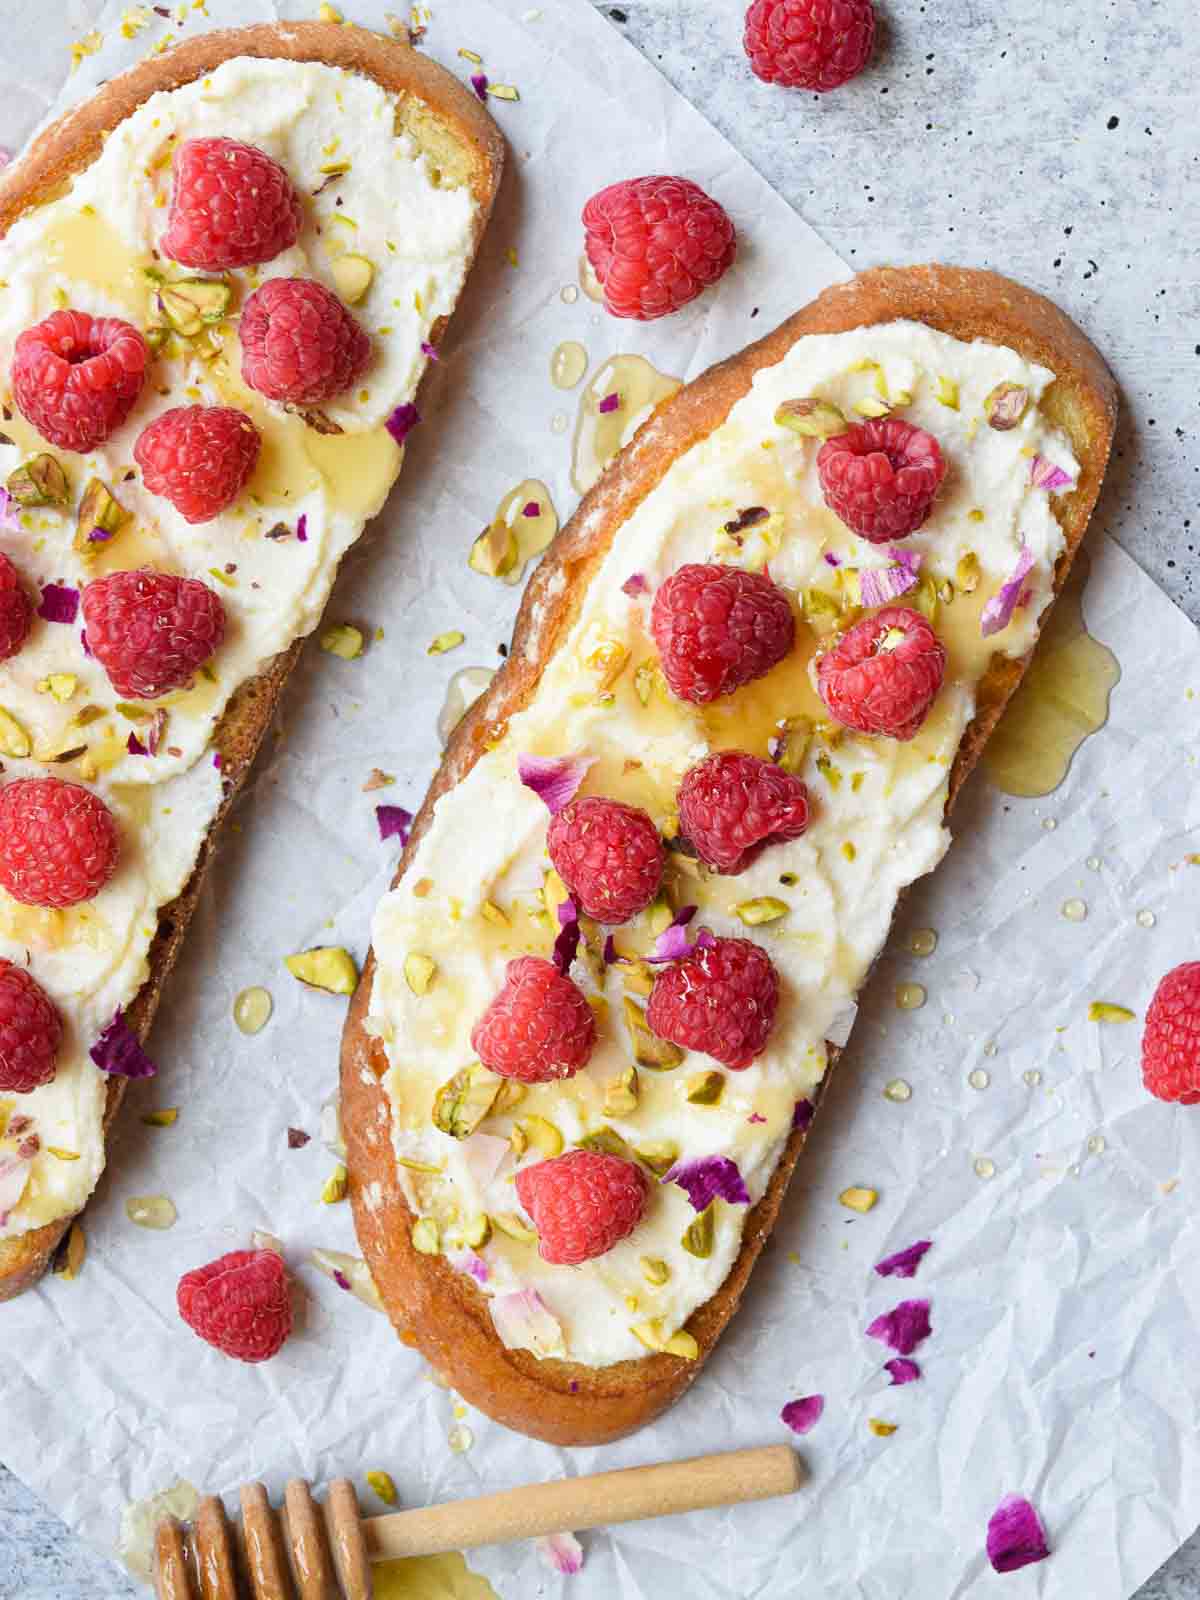 Overhead and close-up view of lemon ricotta raspberry toast on a concrete surface.